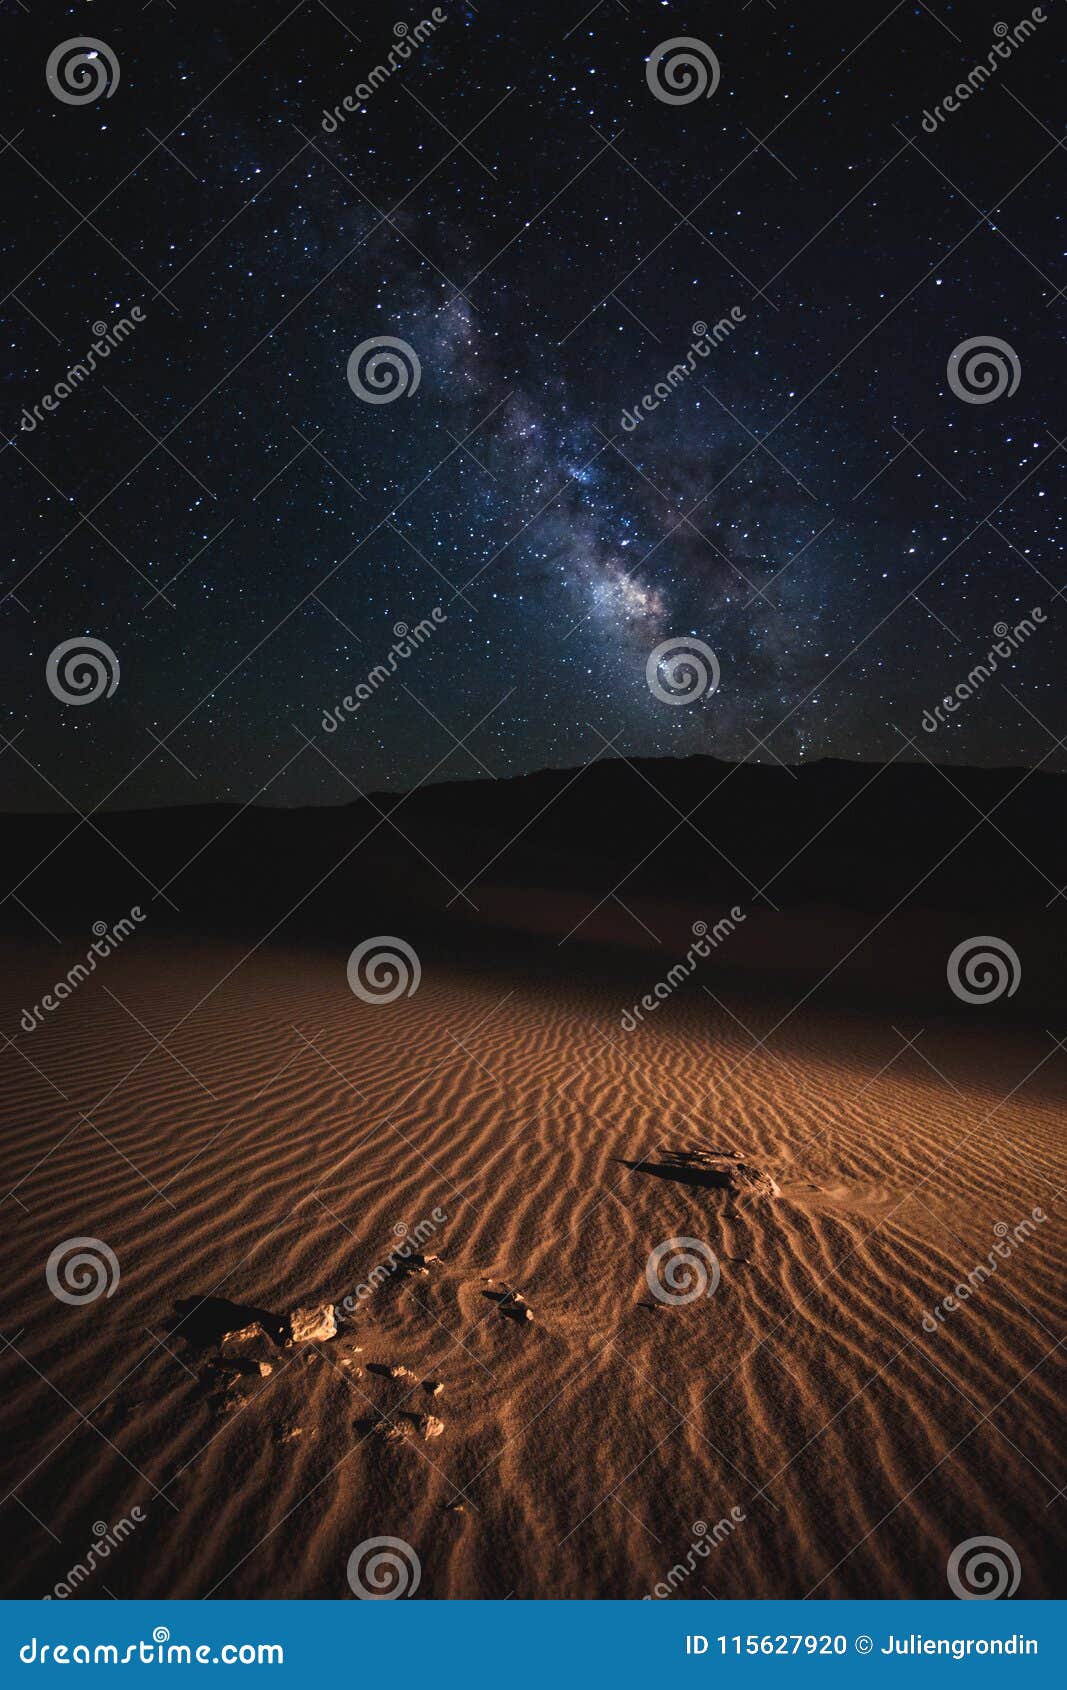 death valley dunes at night under the the milky way